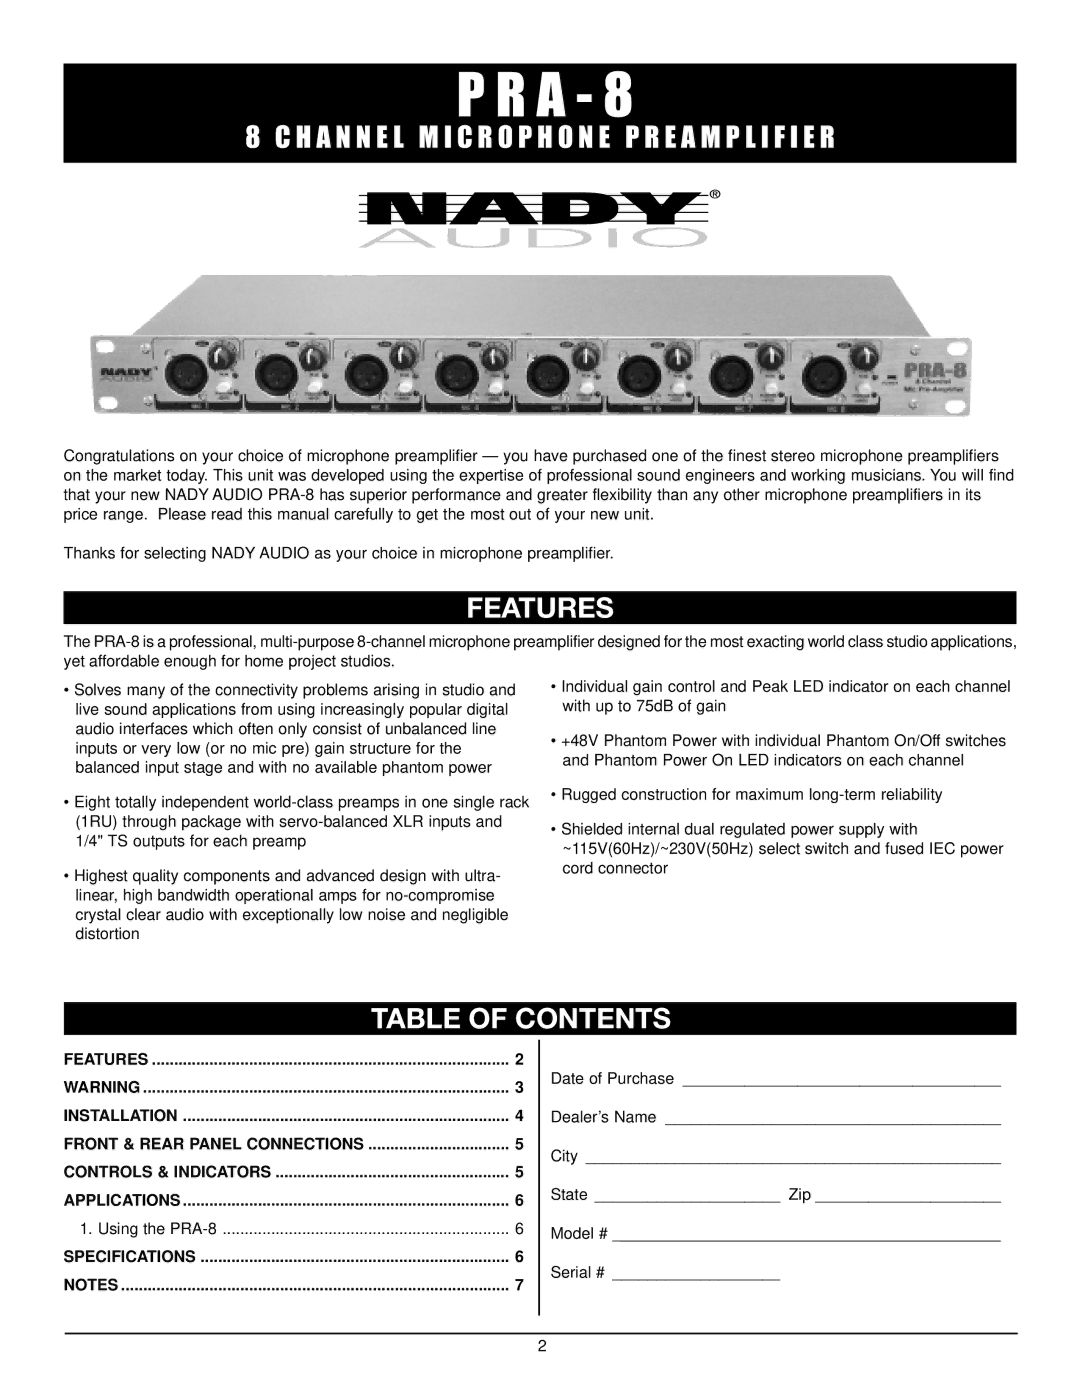 Nady Systems PRA-8 owner manual Features, Table of Contents 